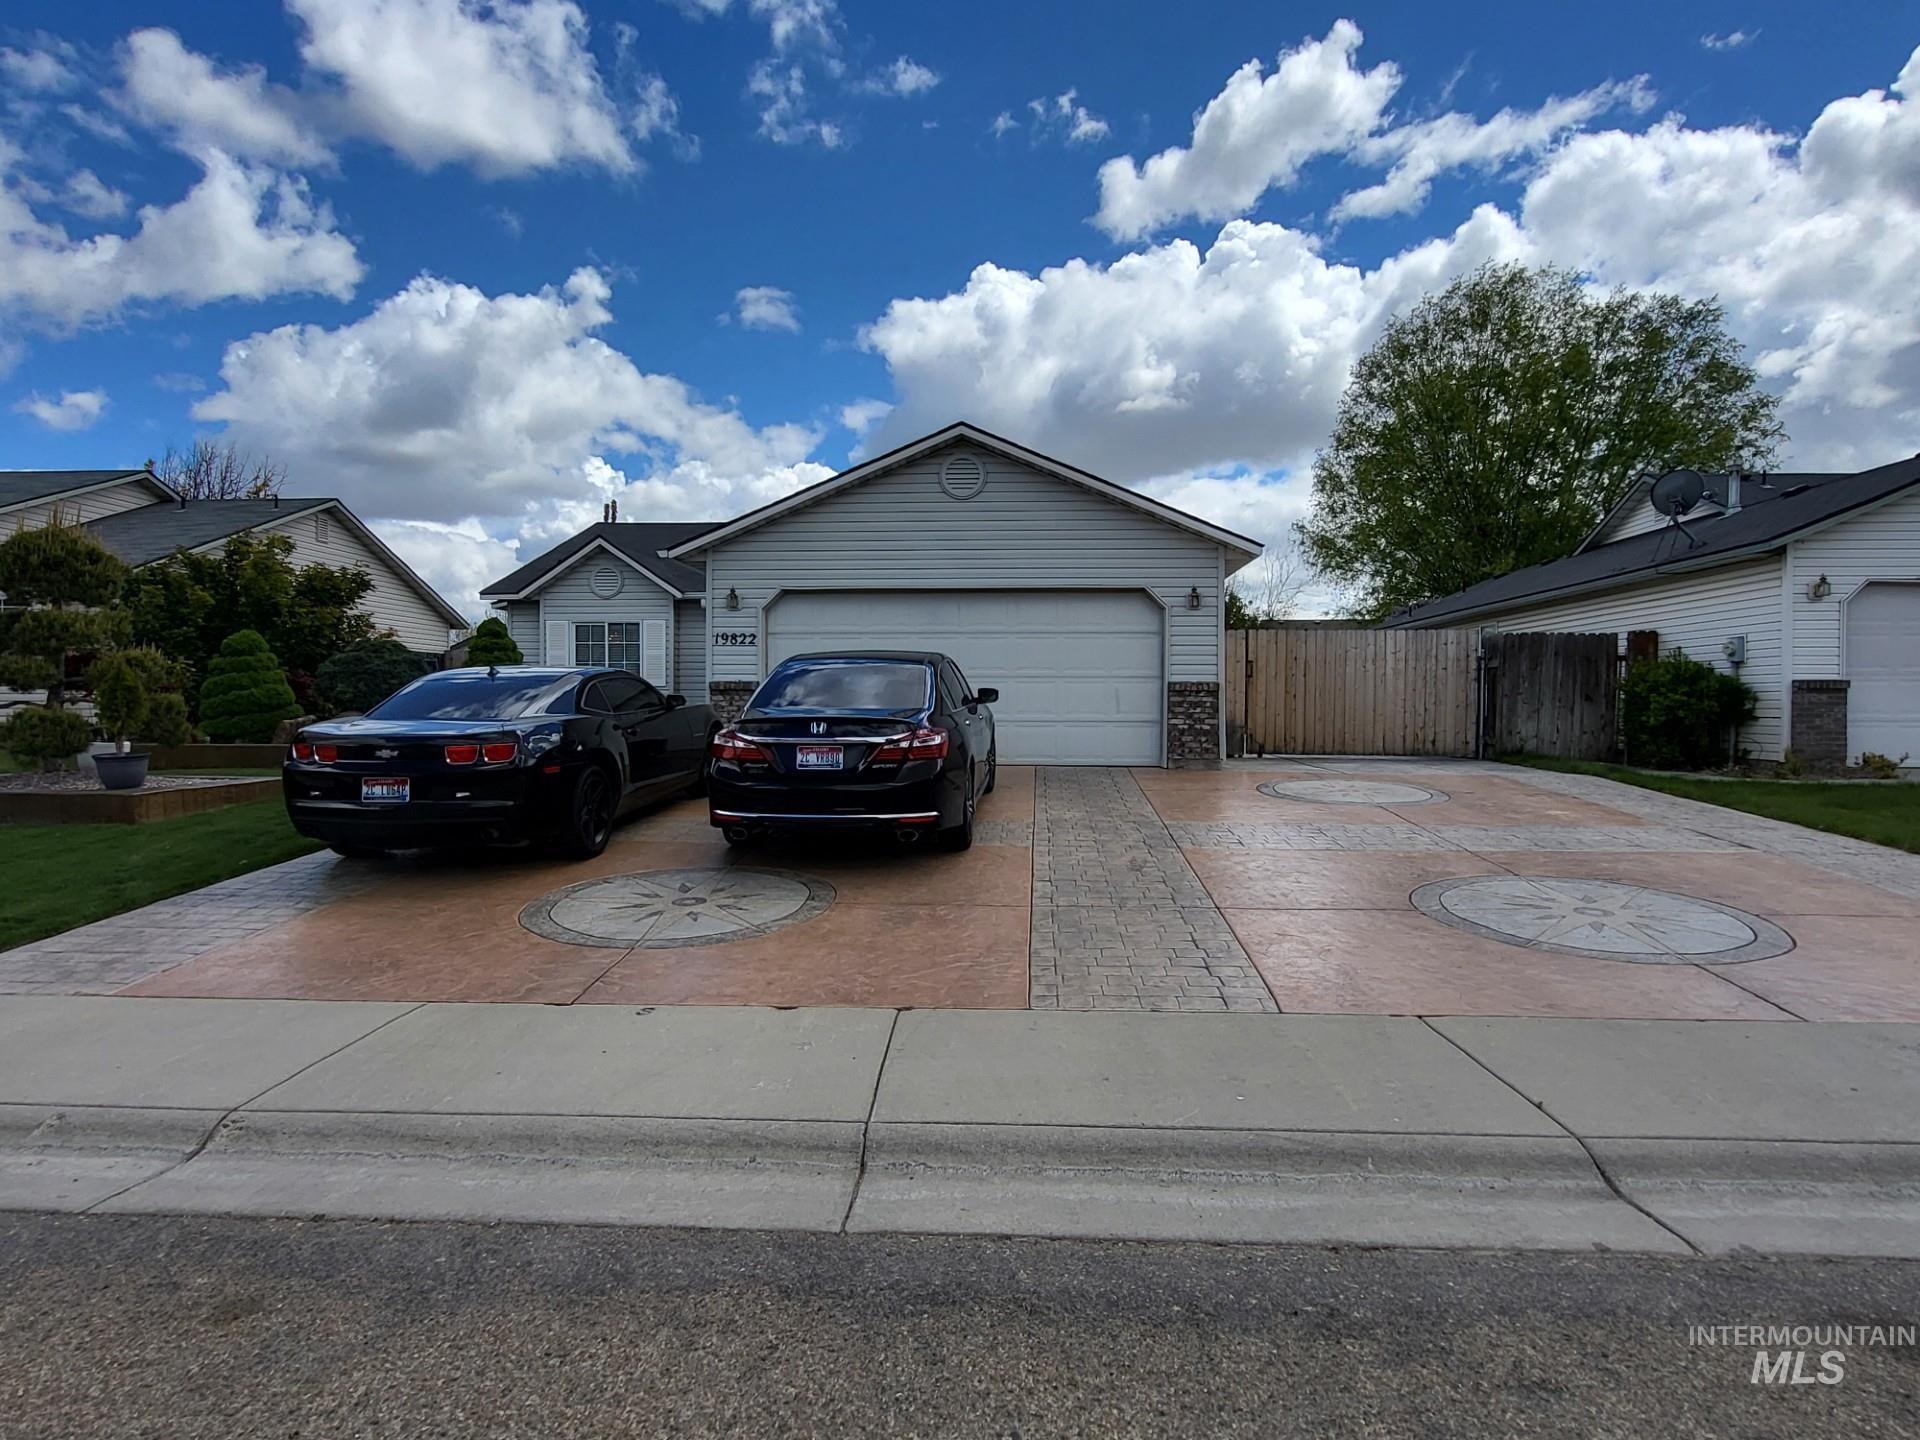 19822 Chesapeake Ave, Caldwell, Idaho 83605, 3 Bedrooms, 2 Bathrooms, Residential For Sale, Price $357,000,MLS 98909284